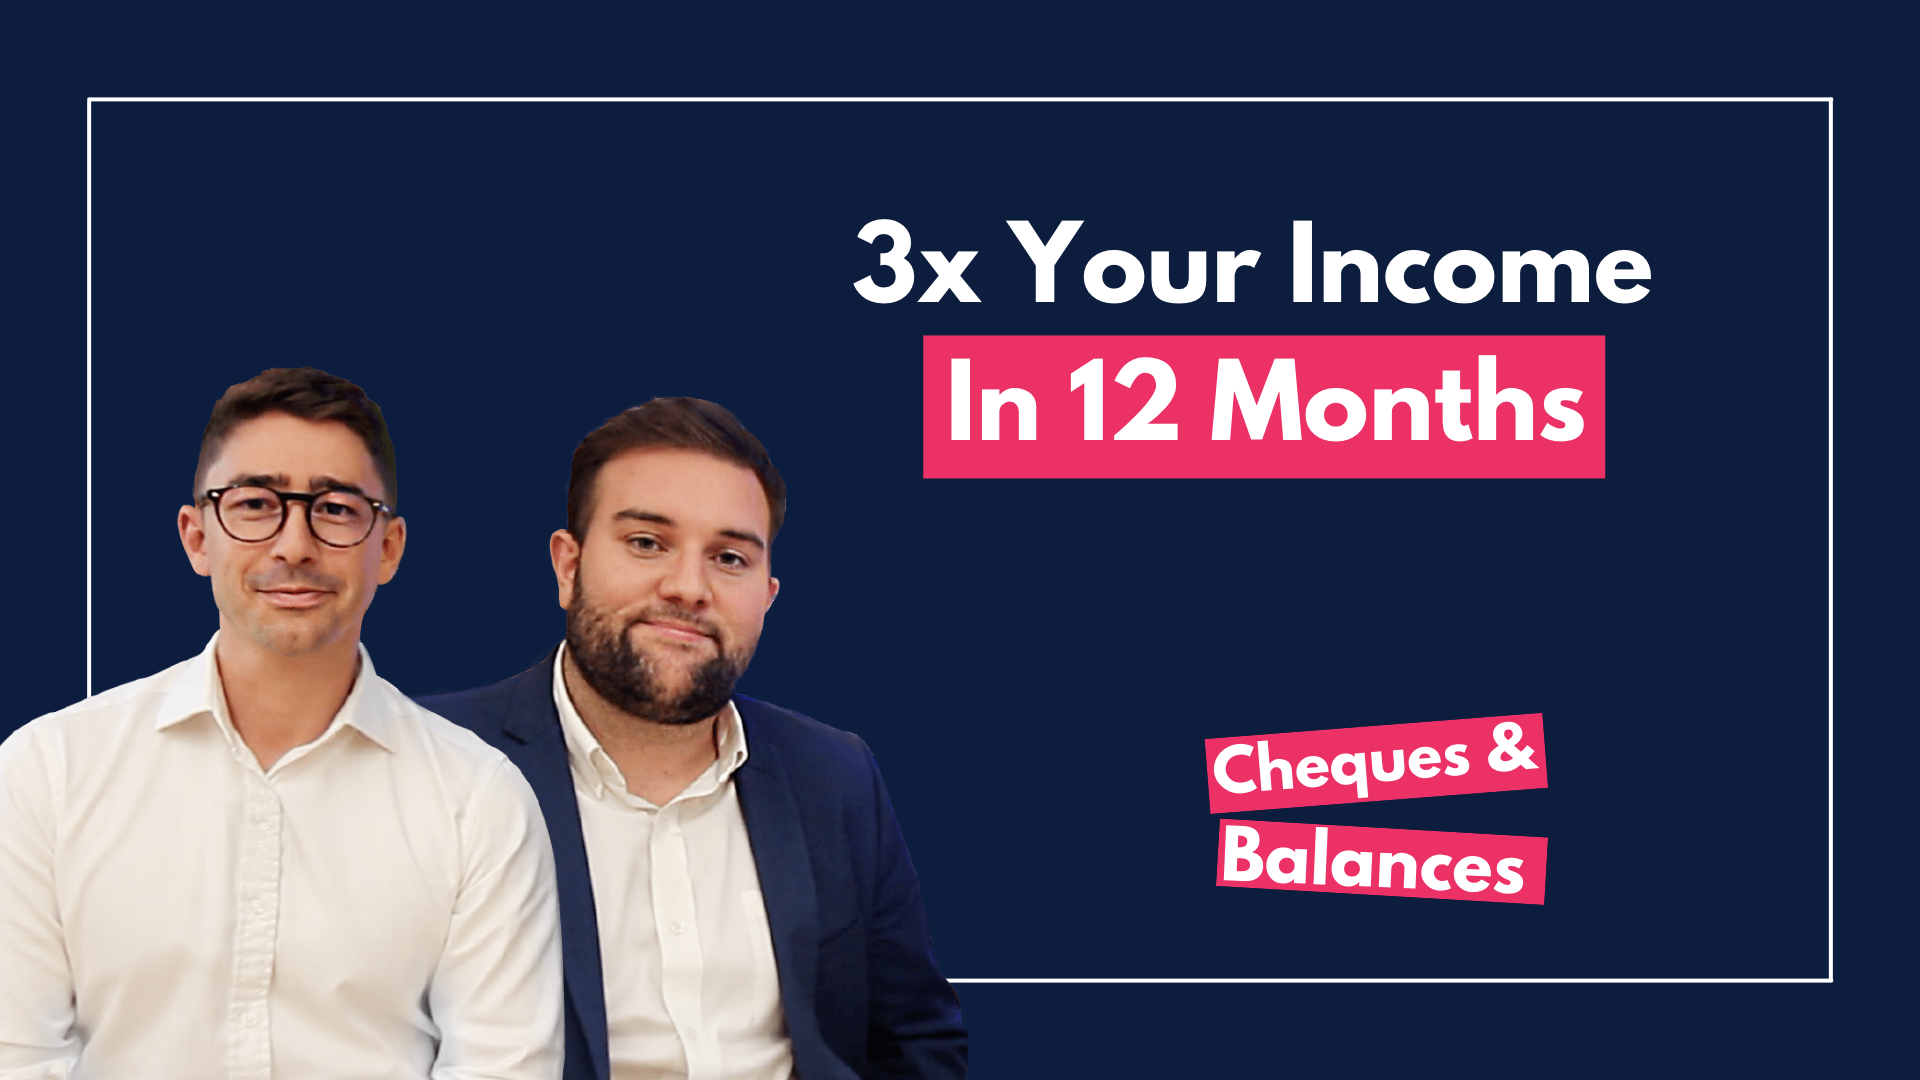 How To 3x Your Income In 12 Months